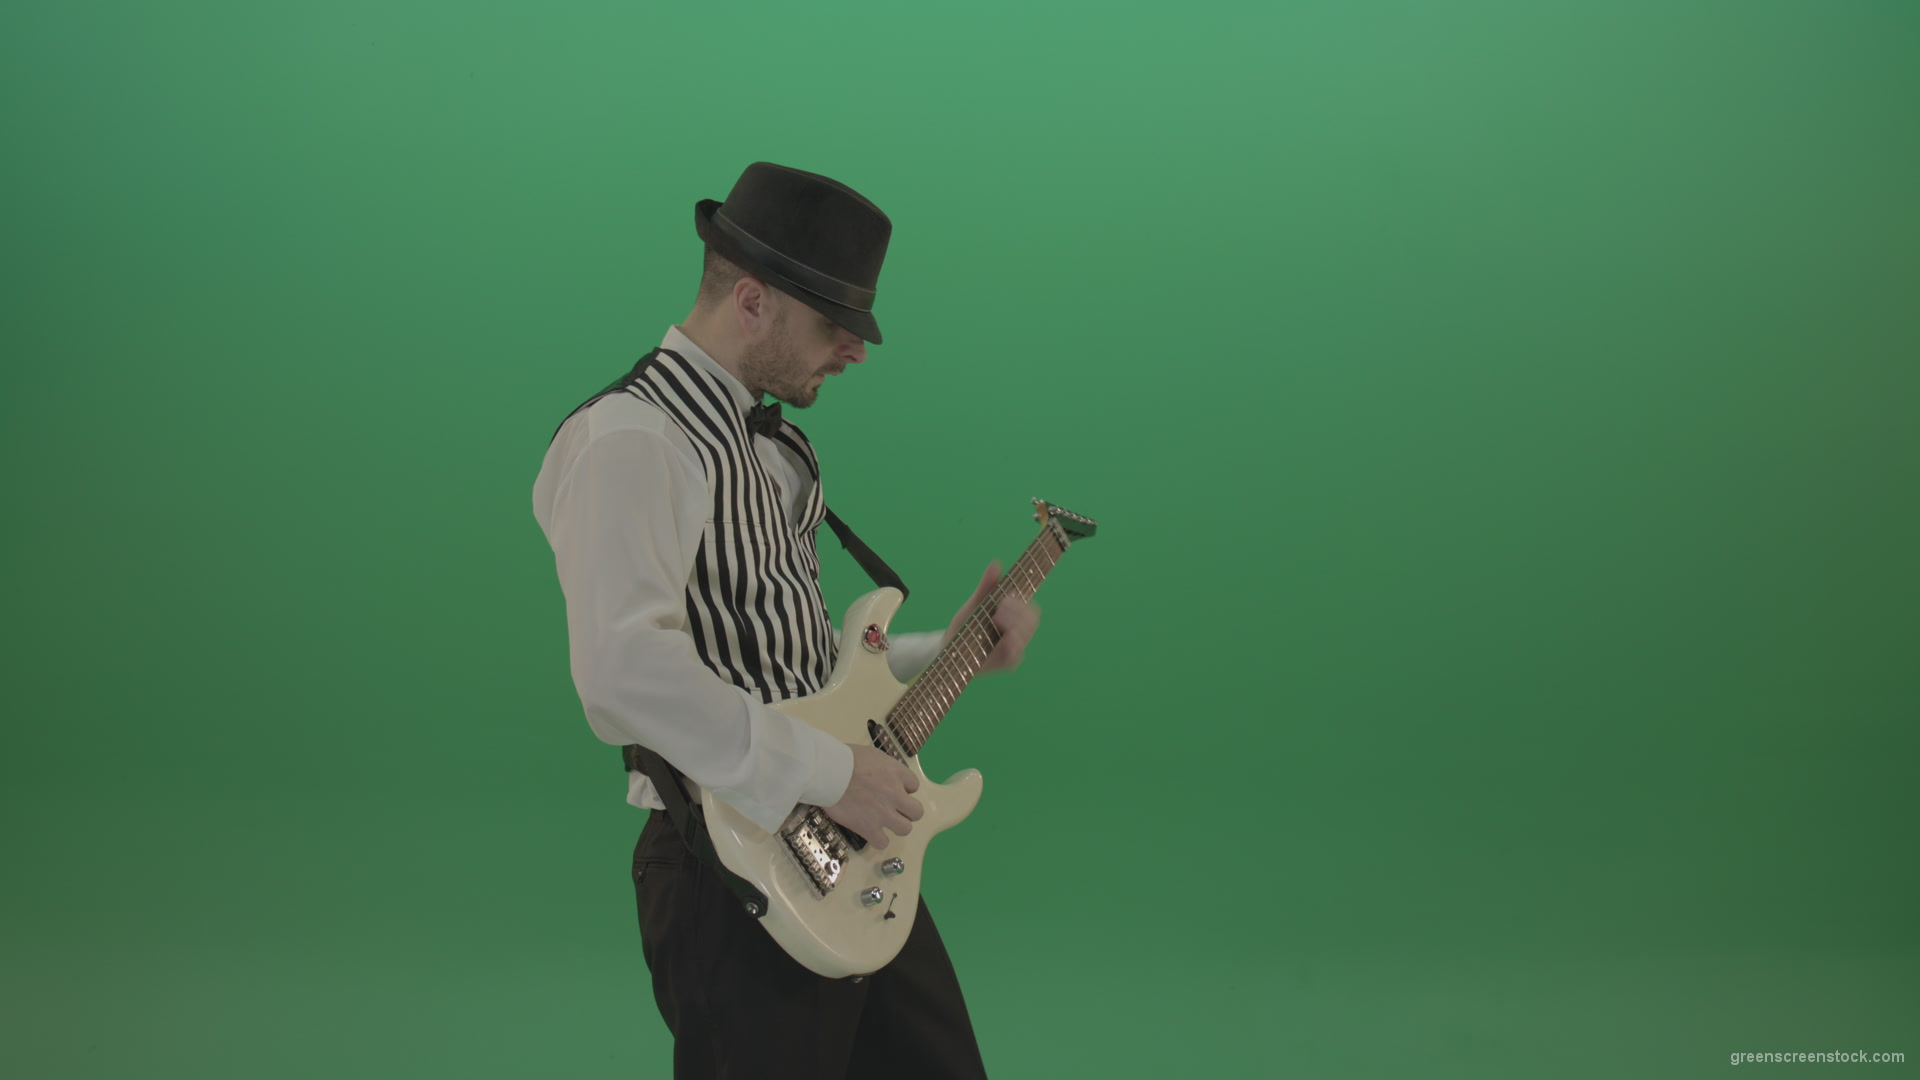 Classic-jazz-guitarist-play-white-electro-guitar-solo-music-on-green-screen_001 Green Screen Stock